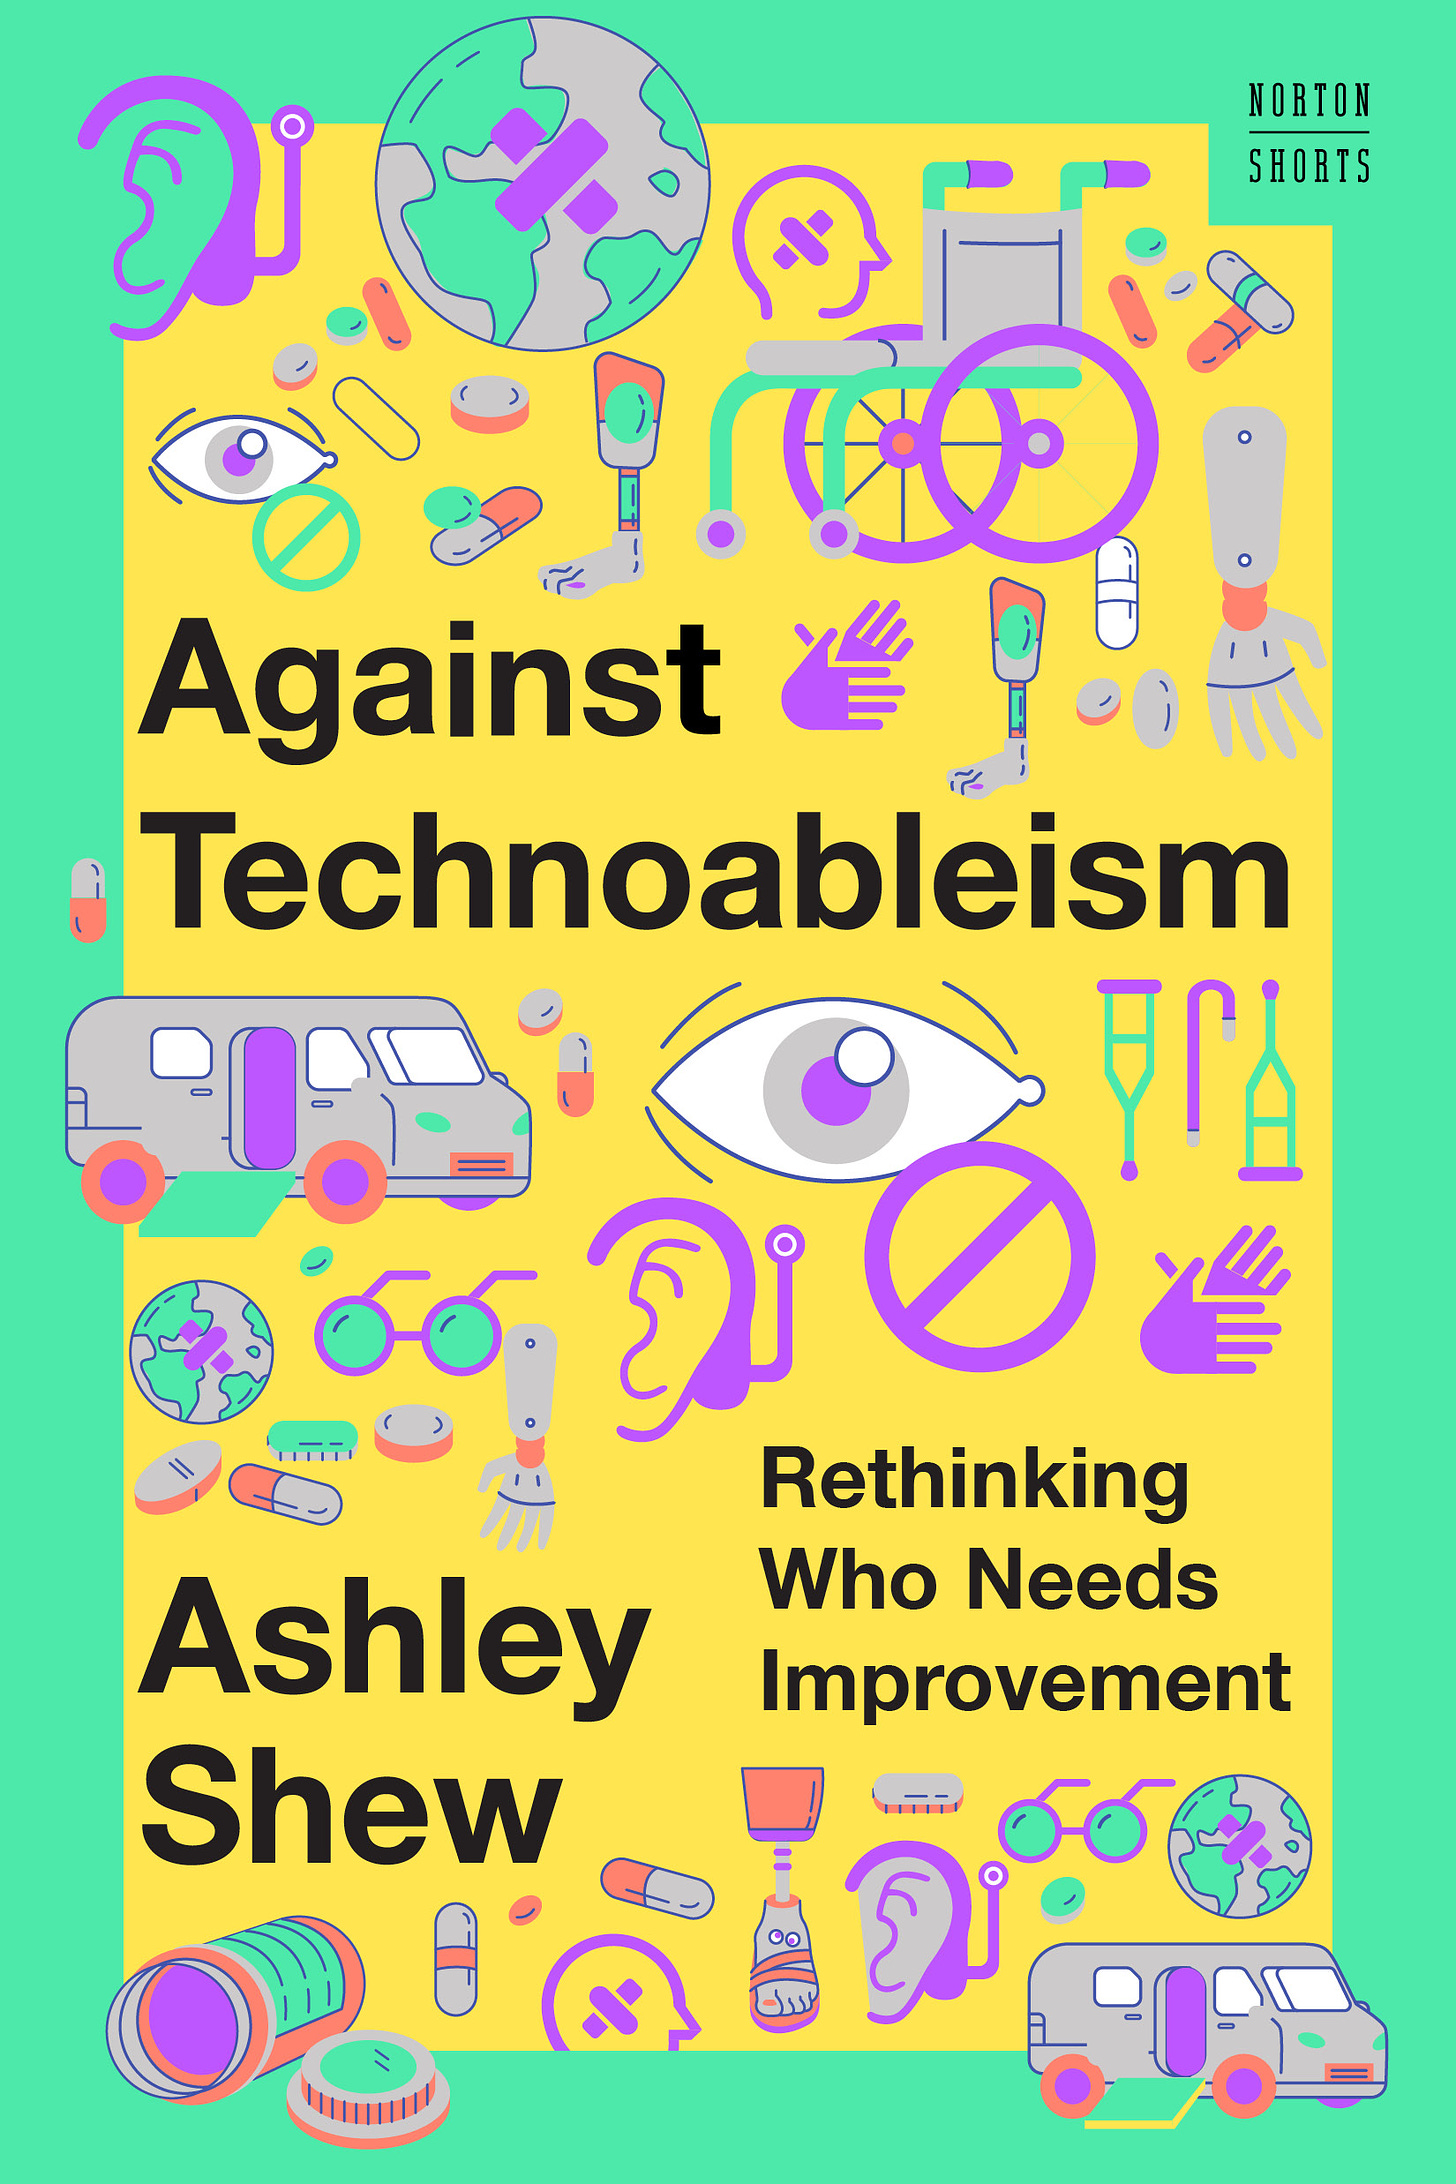 This is a book cover with a green border and a yellow center. It has cartoon images of mobility equipment and medical devices on it and the text reads: "Against Technoableism: Rethinking Who Needs Improvement" by Ashley Shew